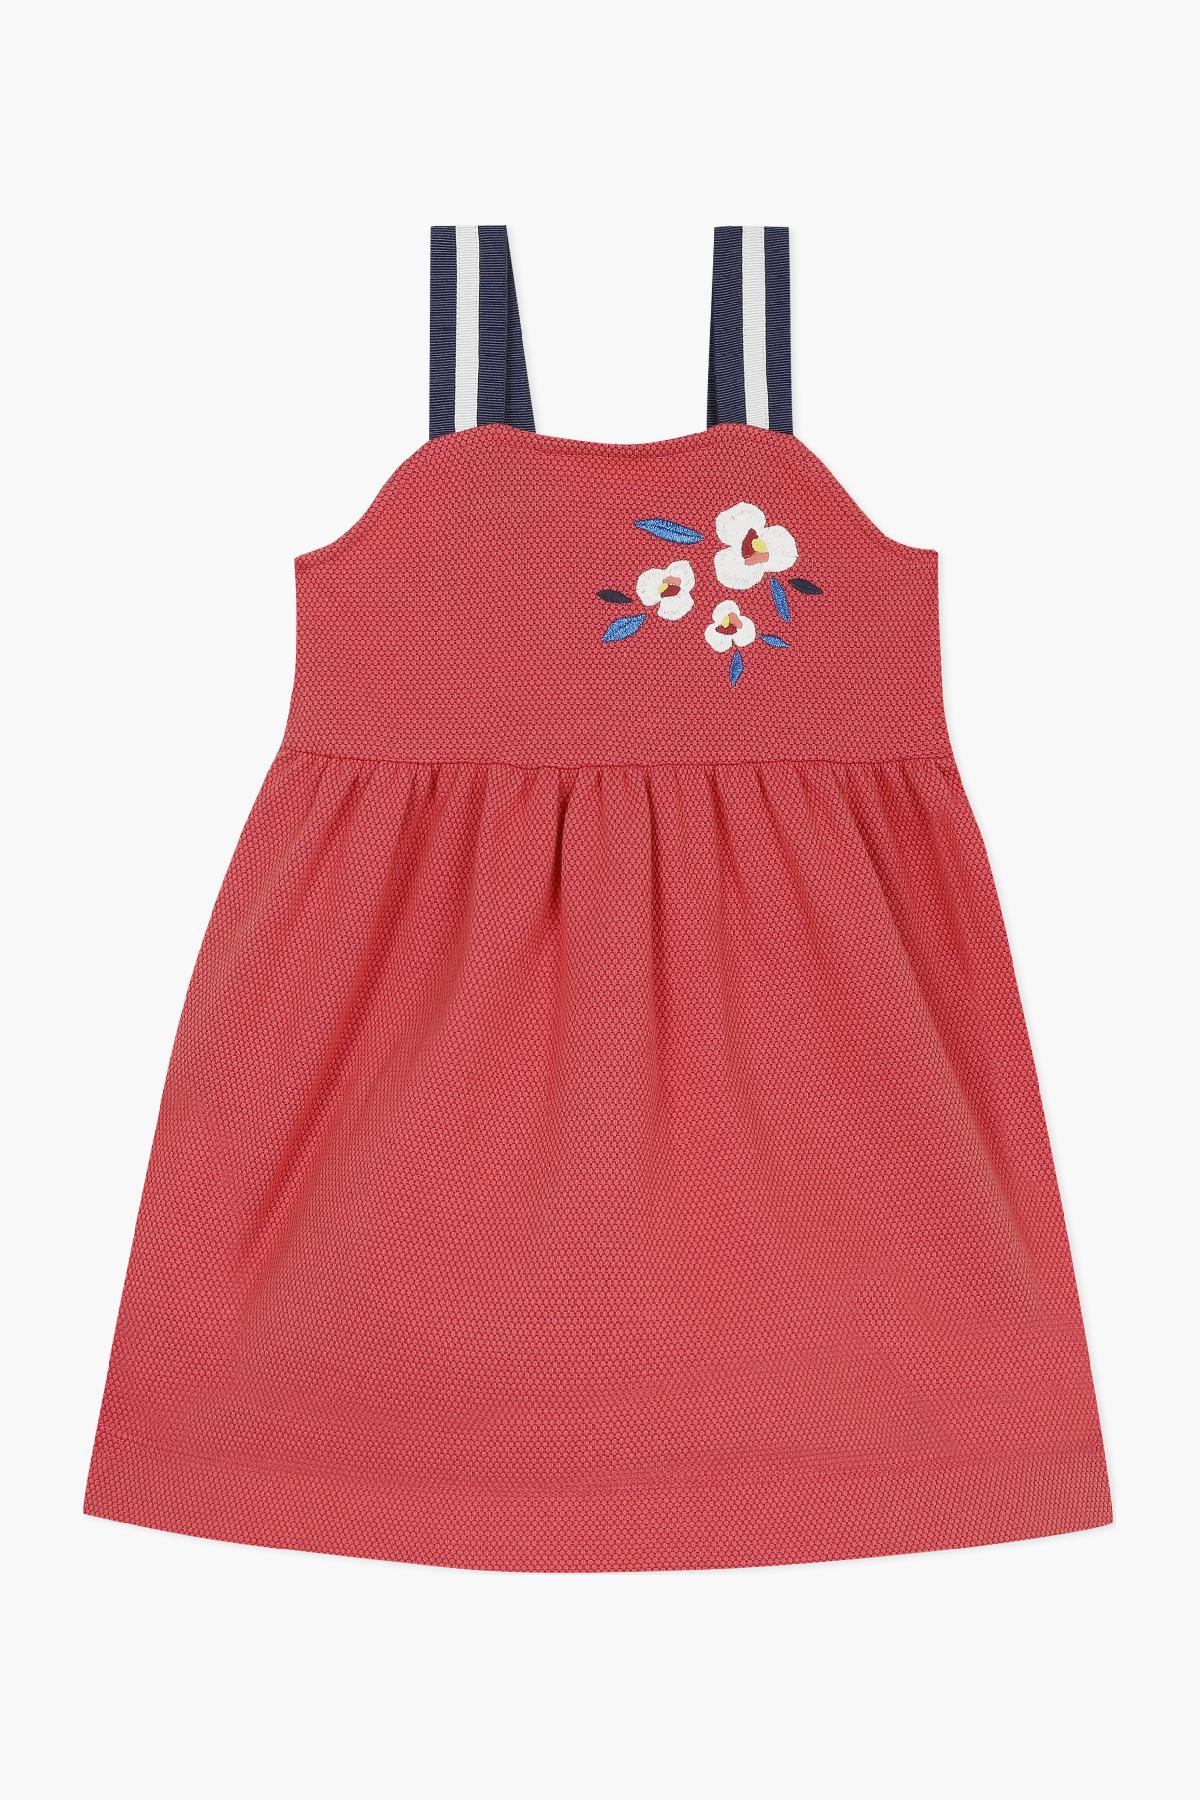 Jean Bourget Floral Embroidered Girls Dress – Mini Ruby